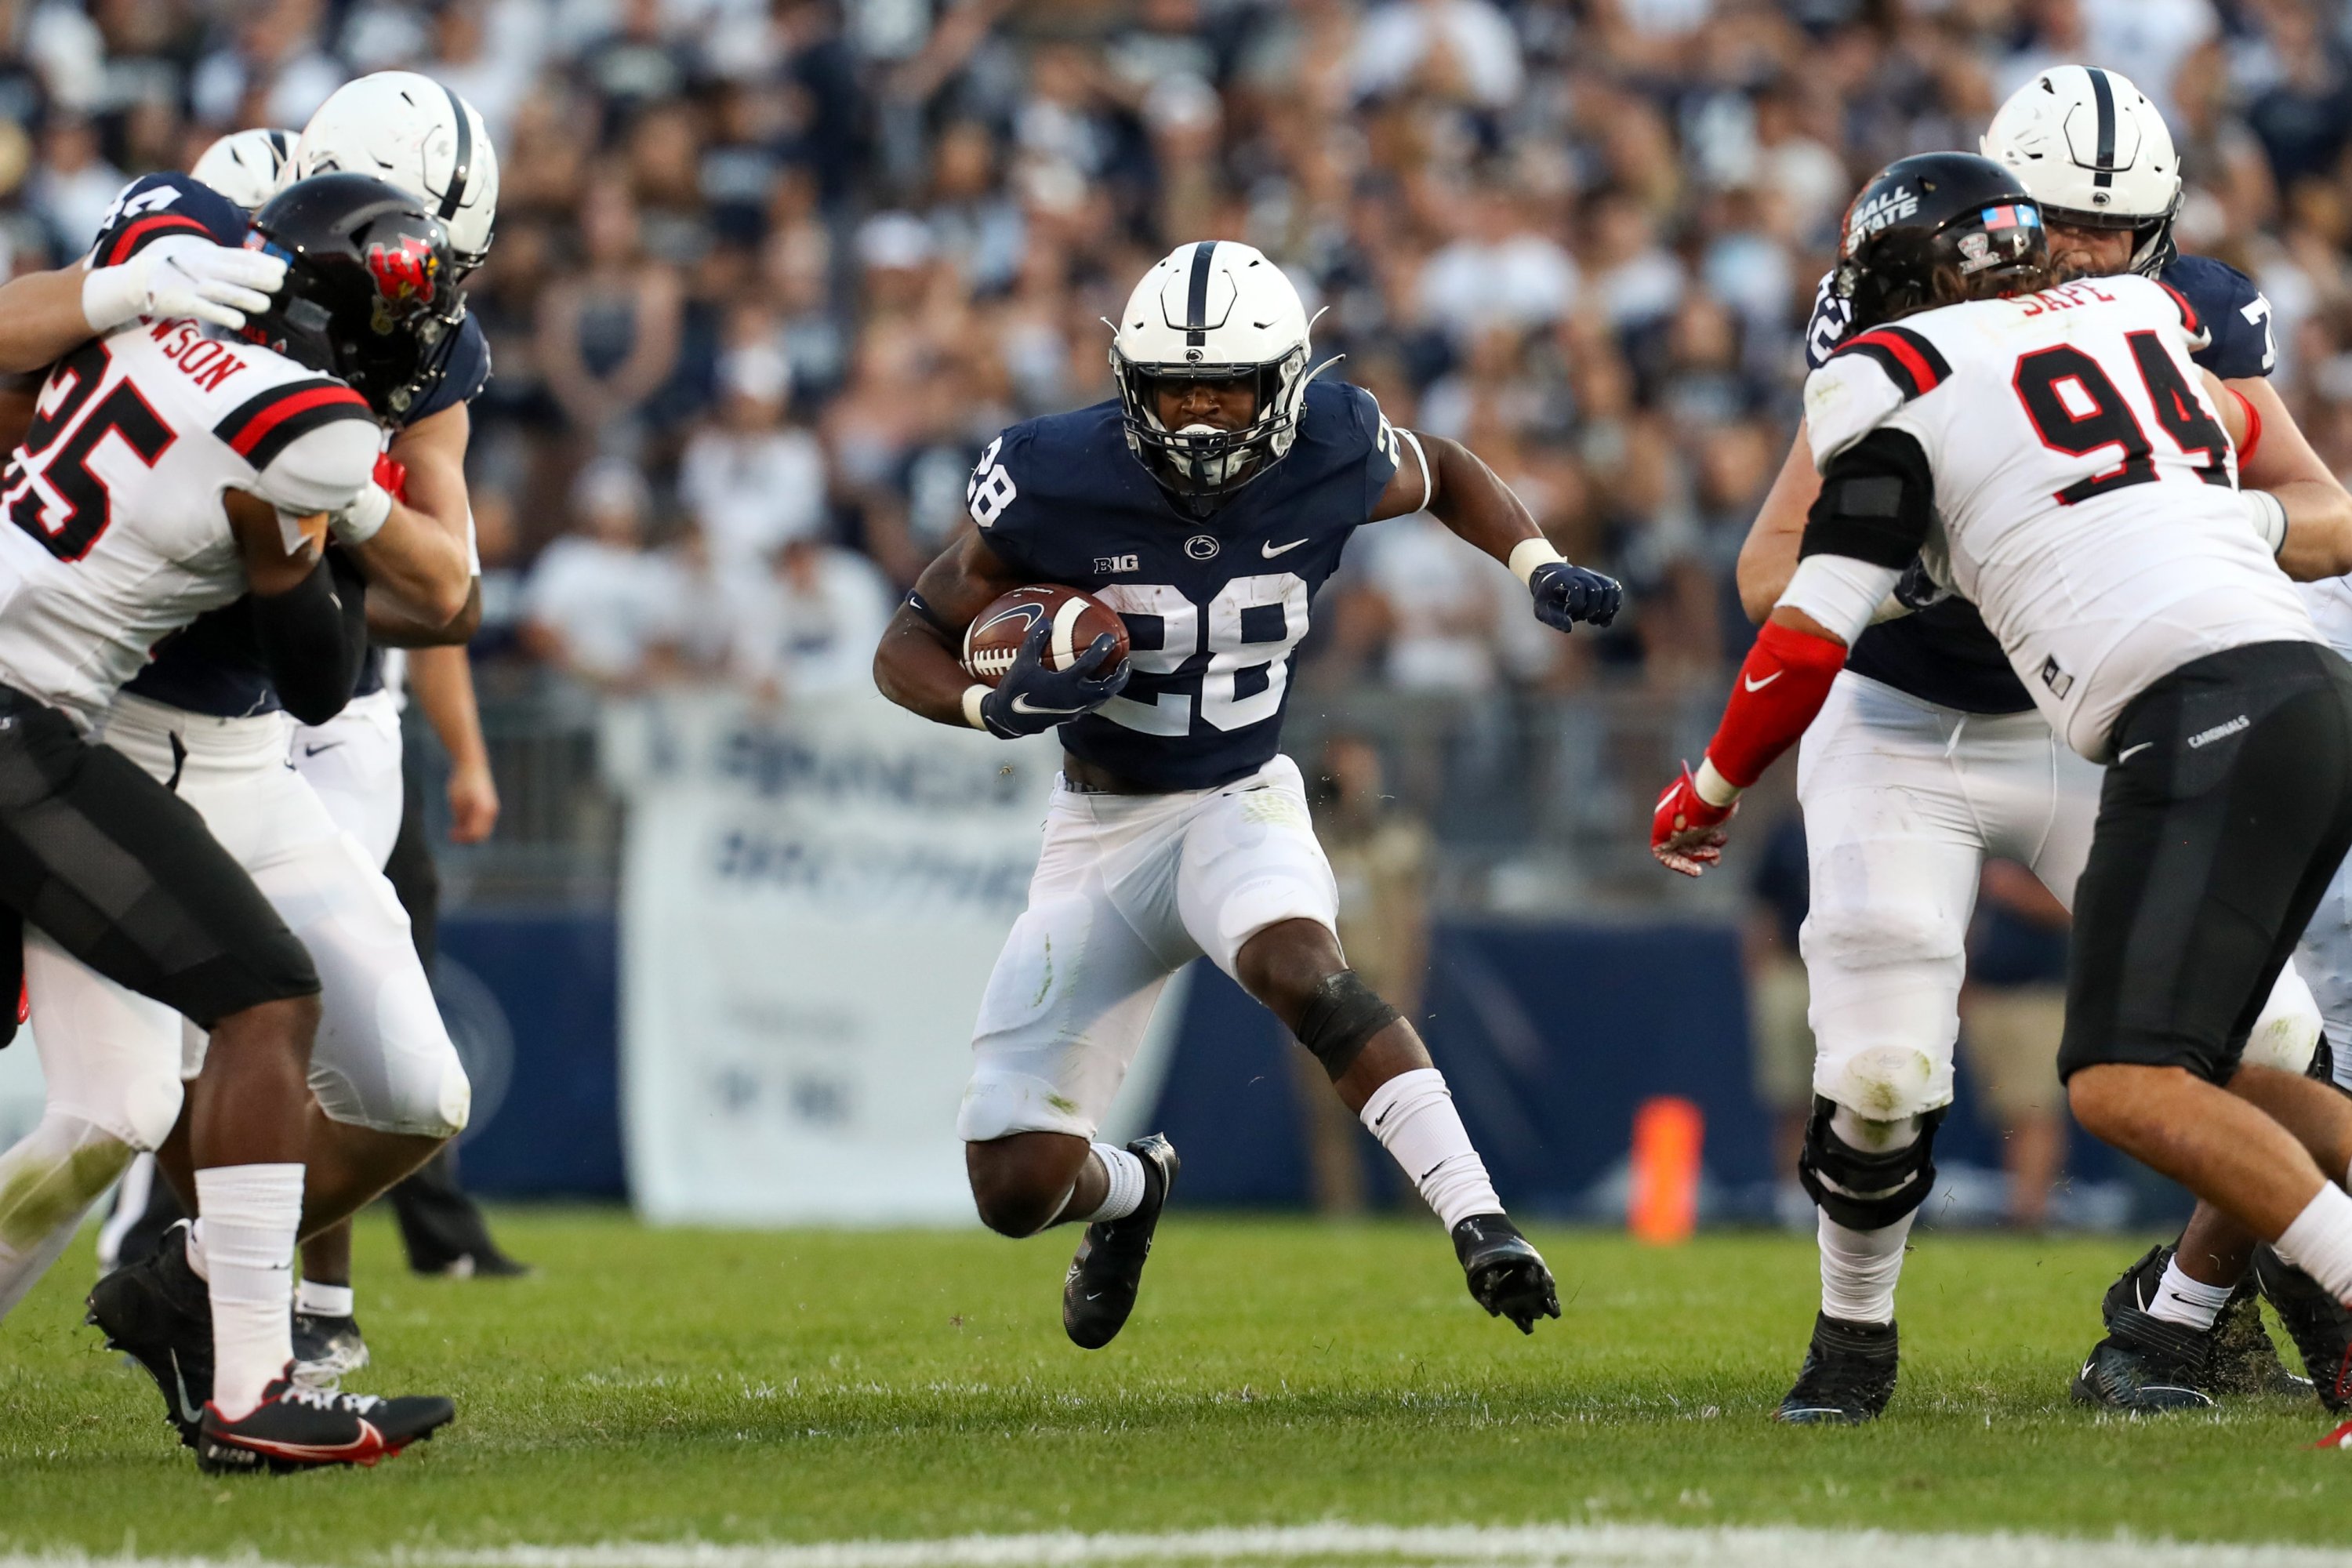 Penn State Nittany Lions running back Devyn Ford (28) runs the ball against the Ball State Cardinals during the fourth quarter at Beaver Stadium, University Park, Pennsylvania, U.S., Sept. 11, 2021. (Matthew OHaren-USA TODAY Sports via Reuters)